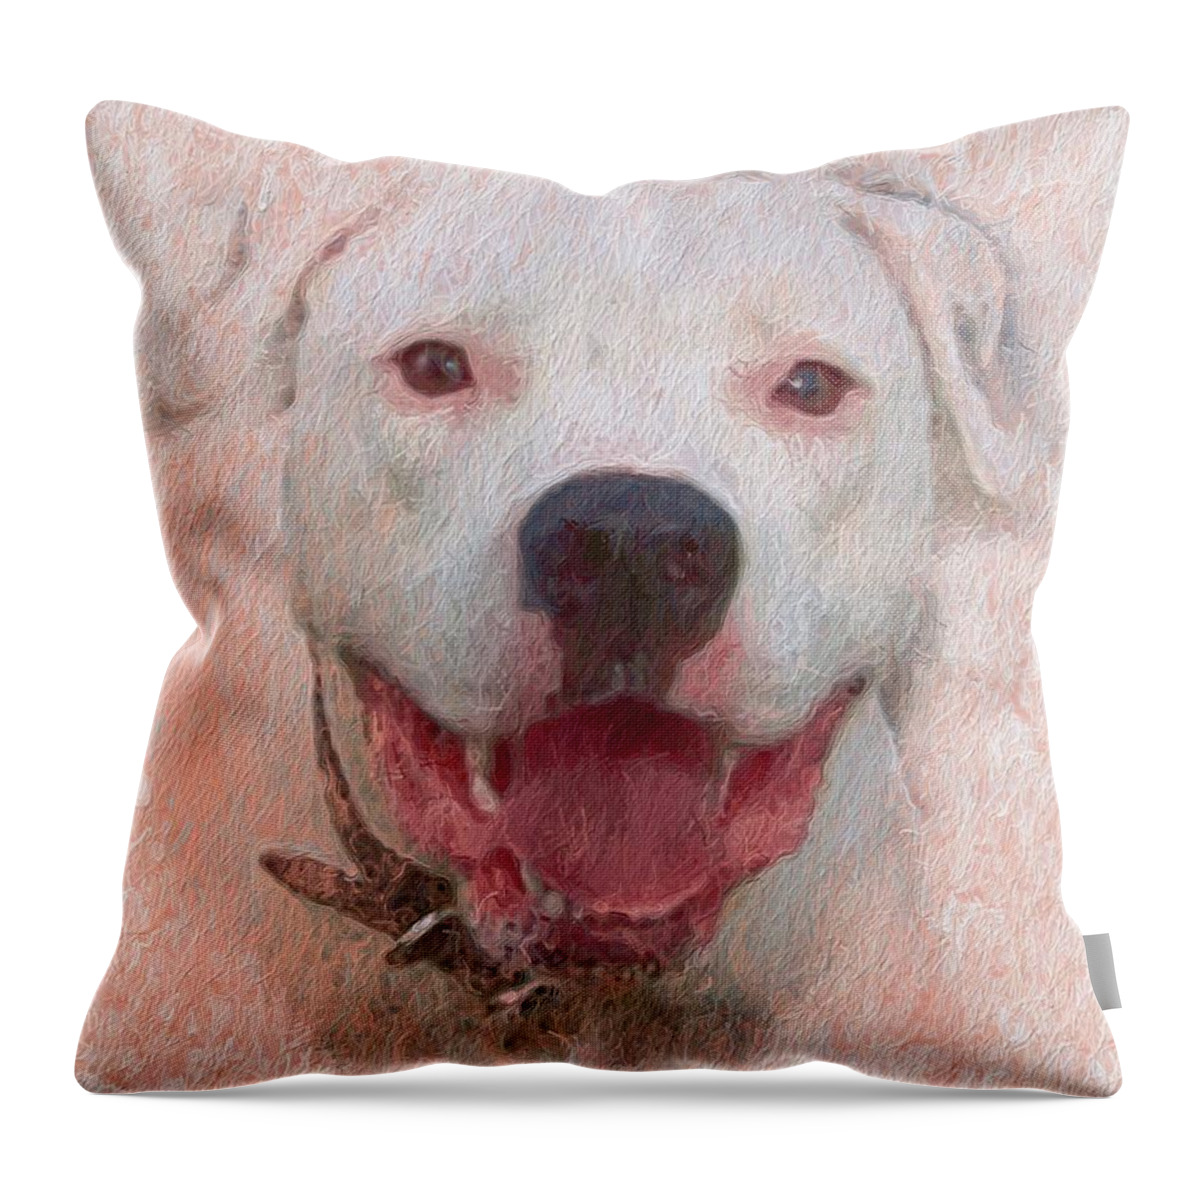 Pit Bull Throw Pillow featuring the photograph Pit Bull by Skip Hunt